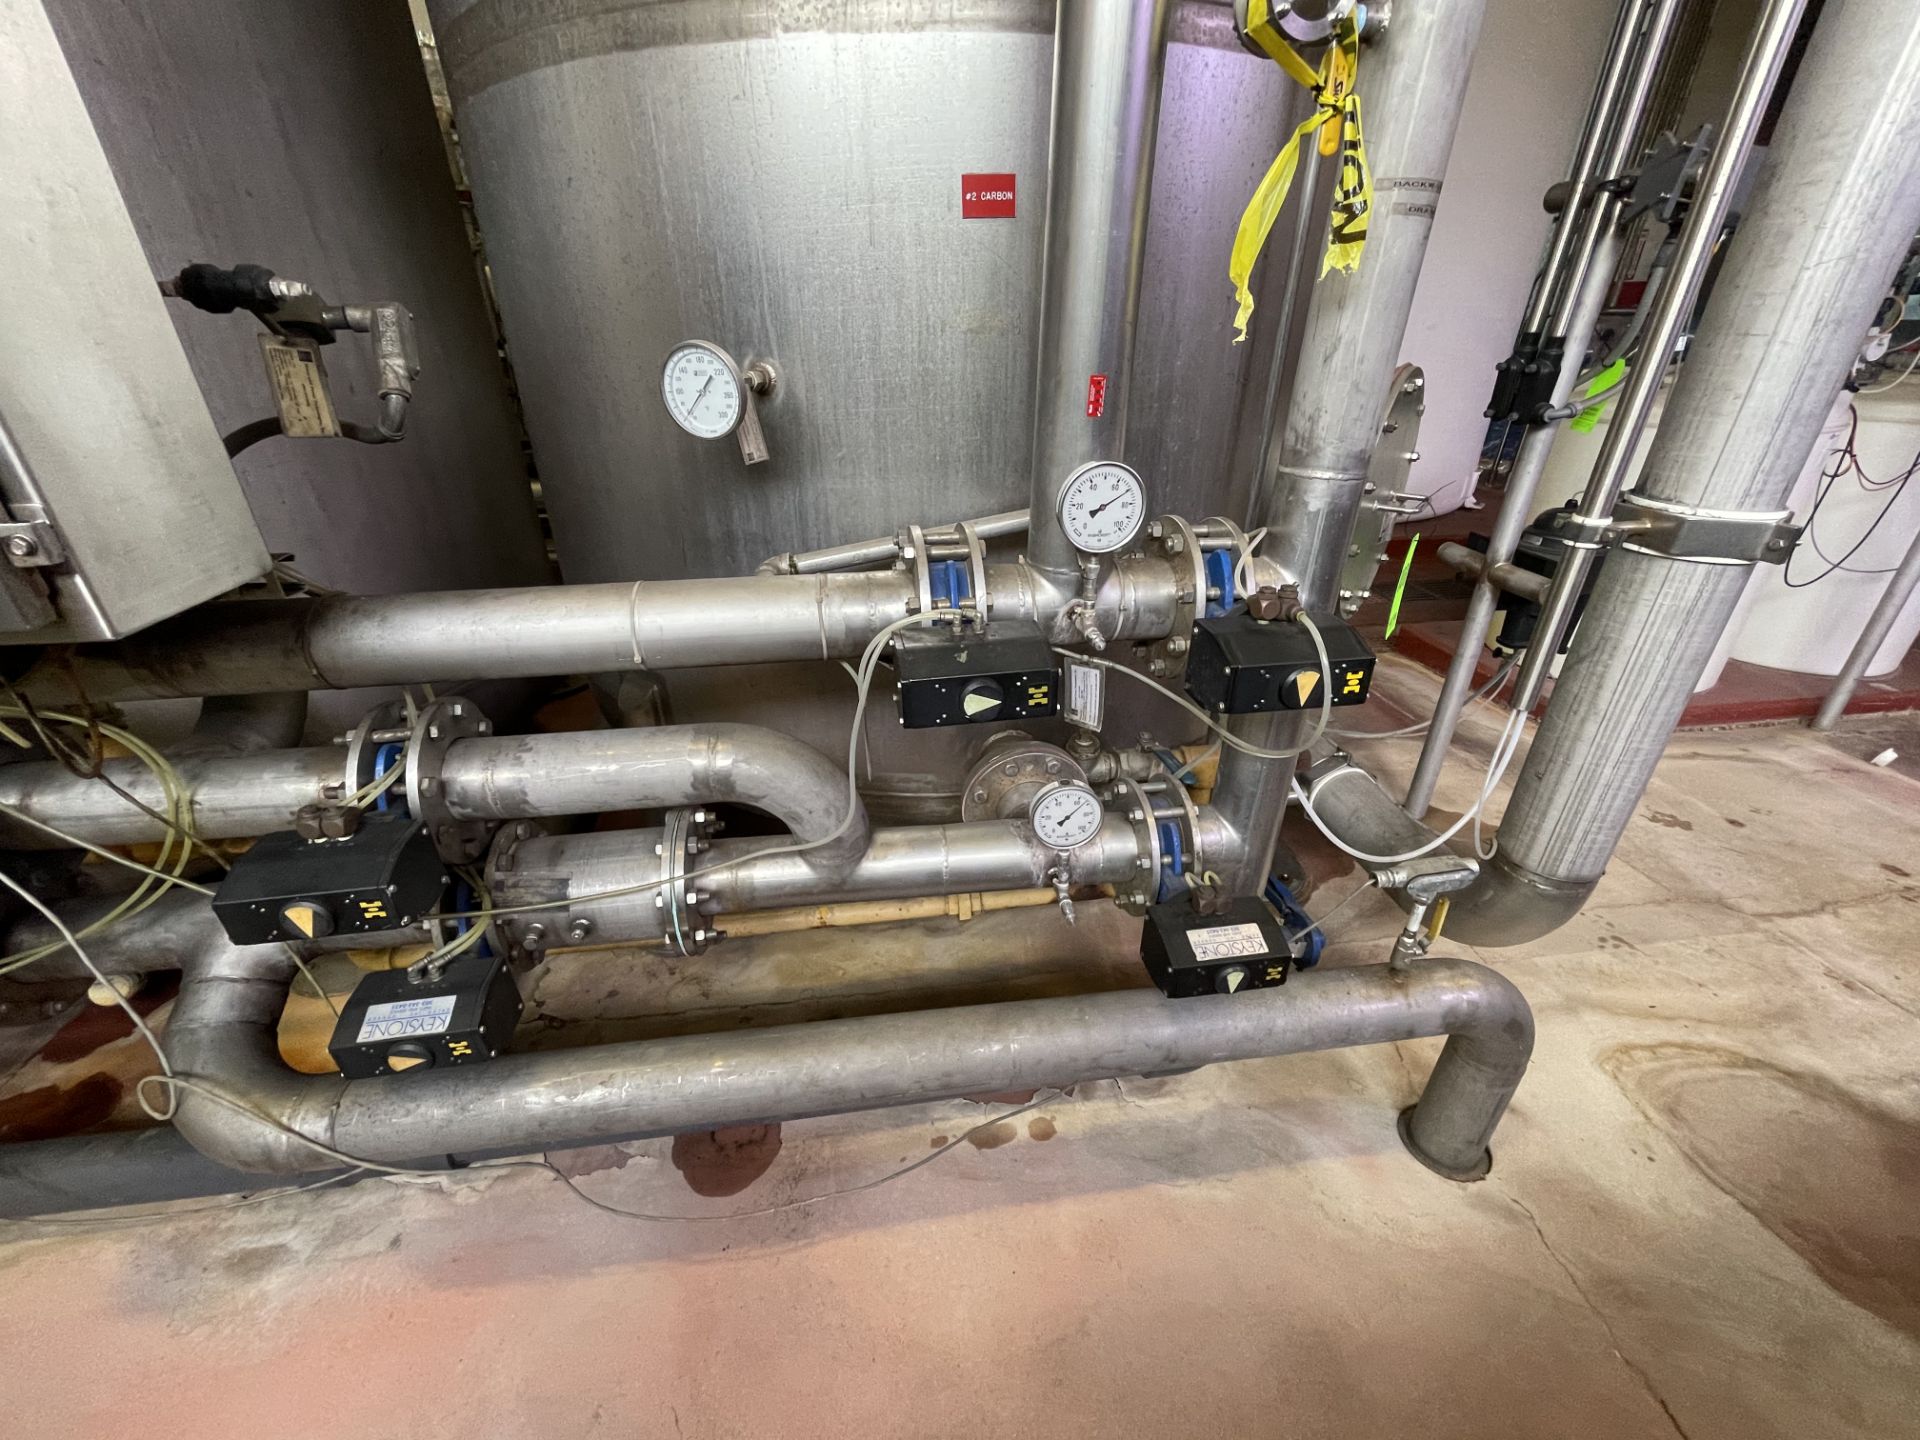 Stainless Steel Water Treatment Pipe Manifold with Control Panel - Image 3 of 3